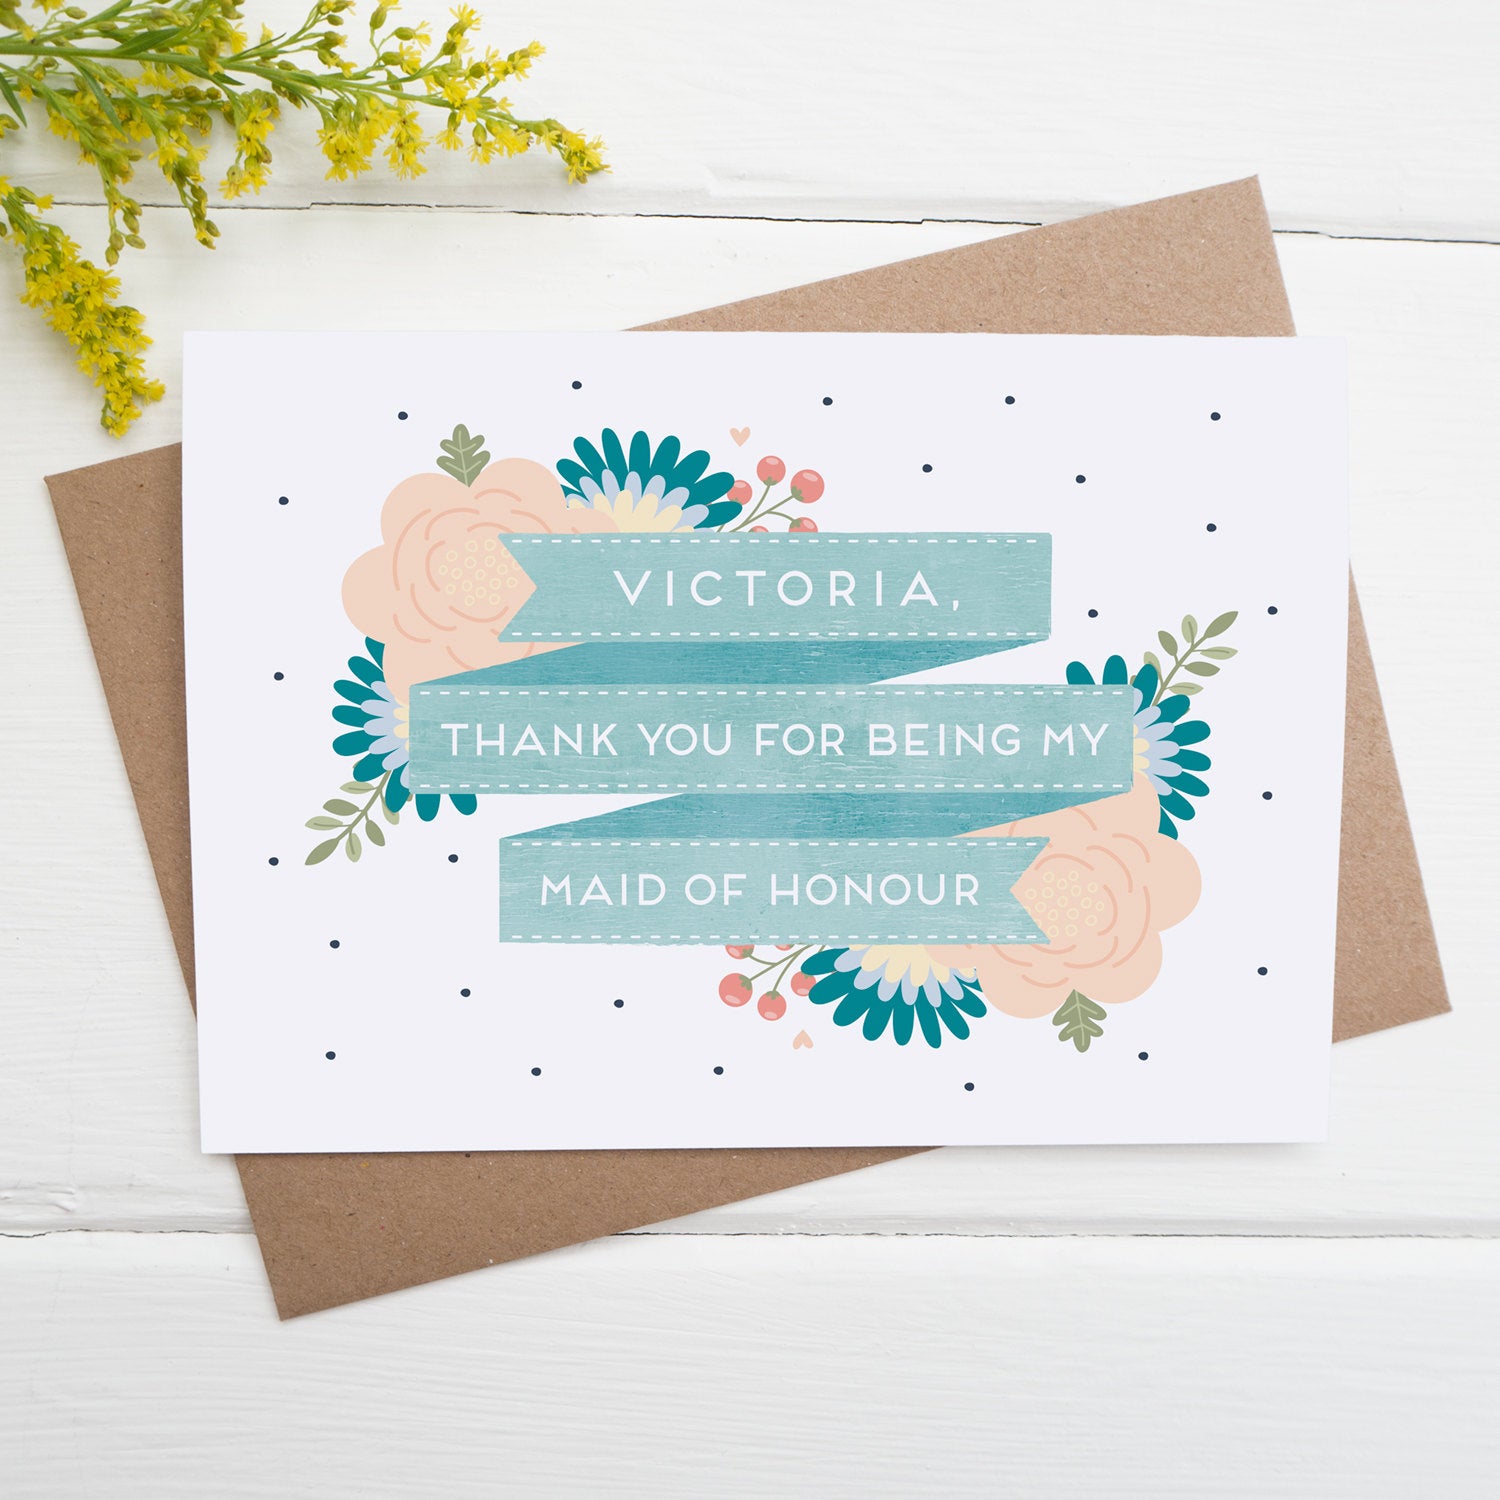 Personalised thank you for being my maid of honour card in blue